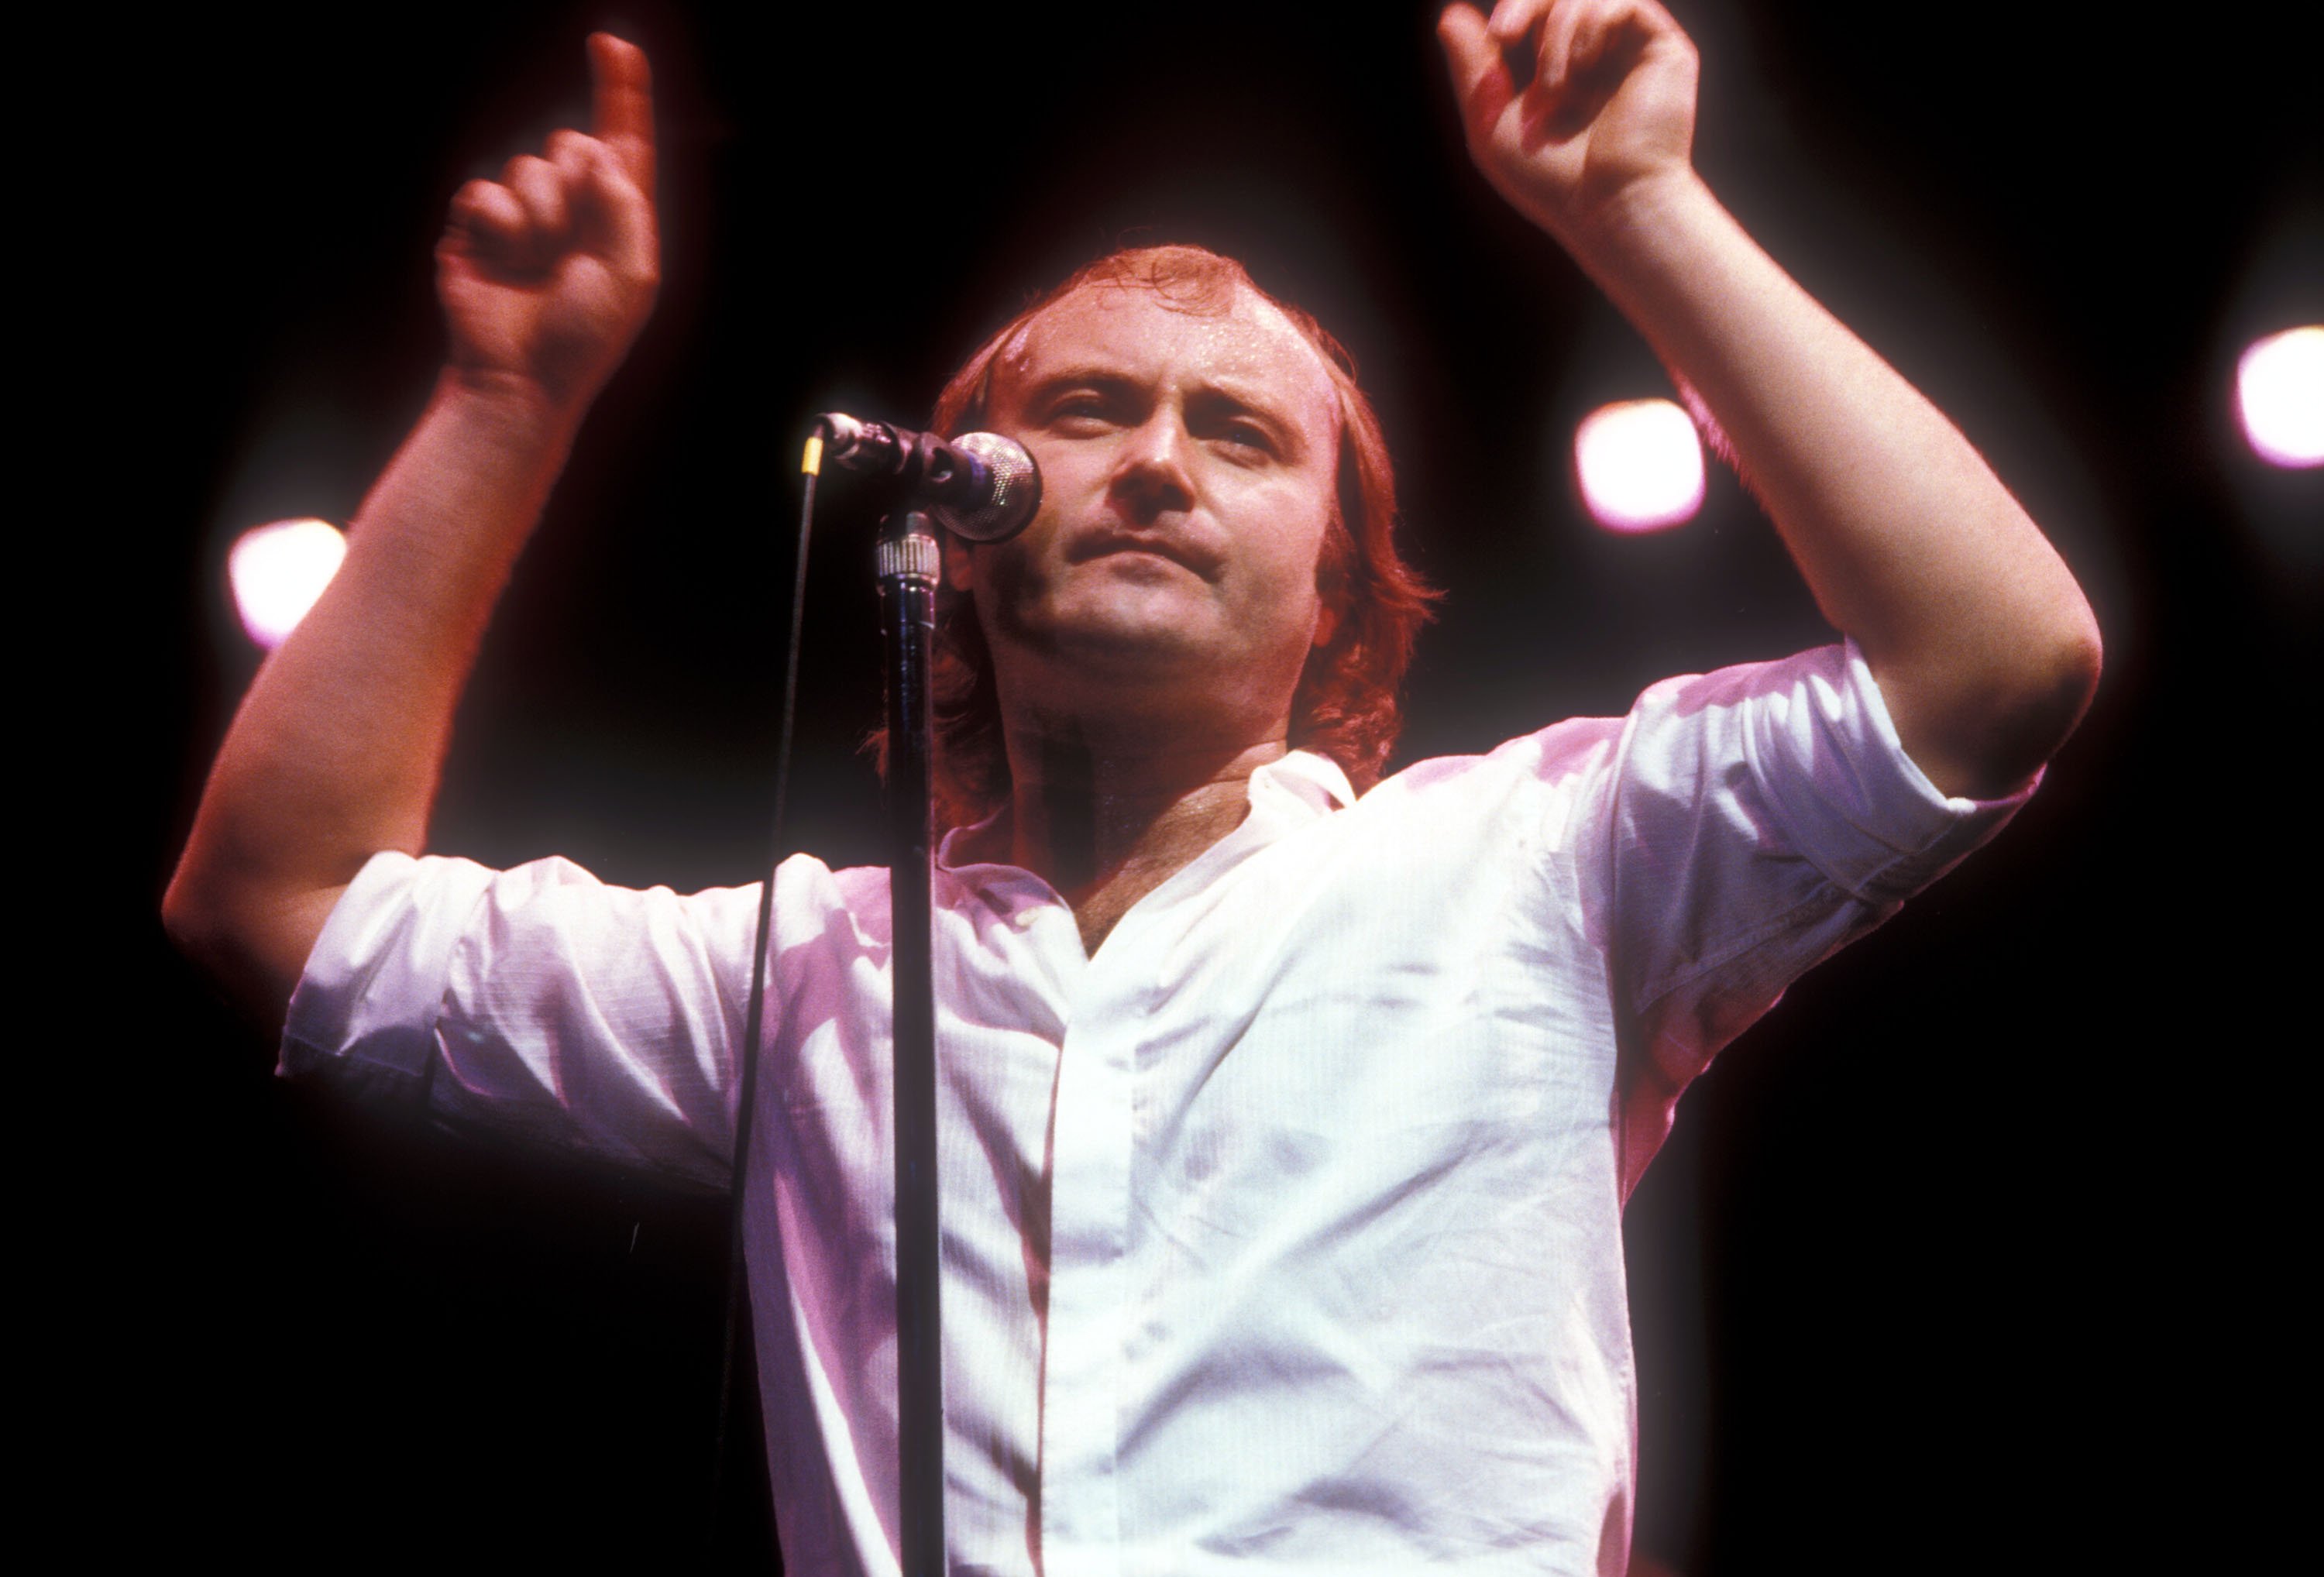 Phil Collins putting his fingers in the air